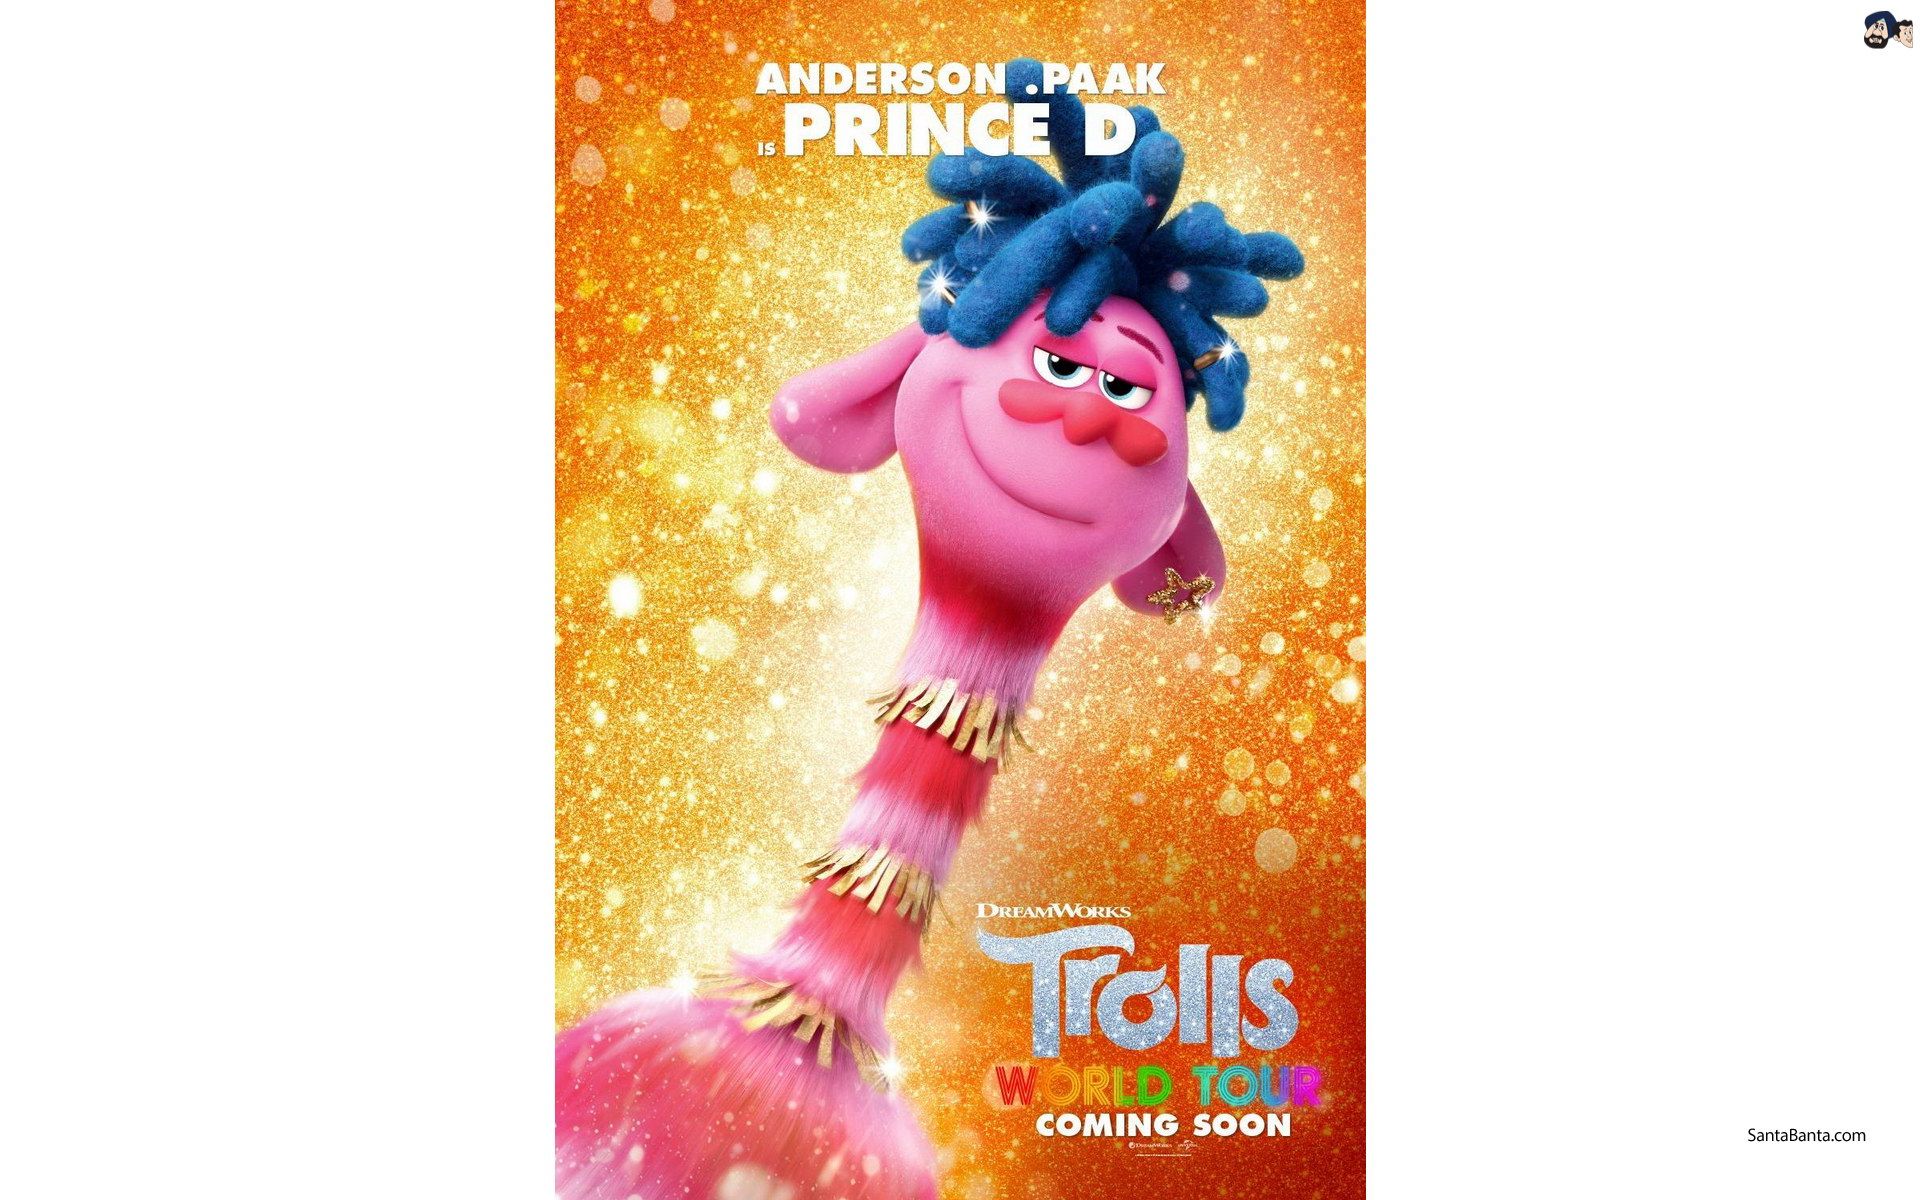 Anderson Paak As `Prince D` In Animated Comedy Film `Trolls World